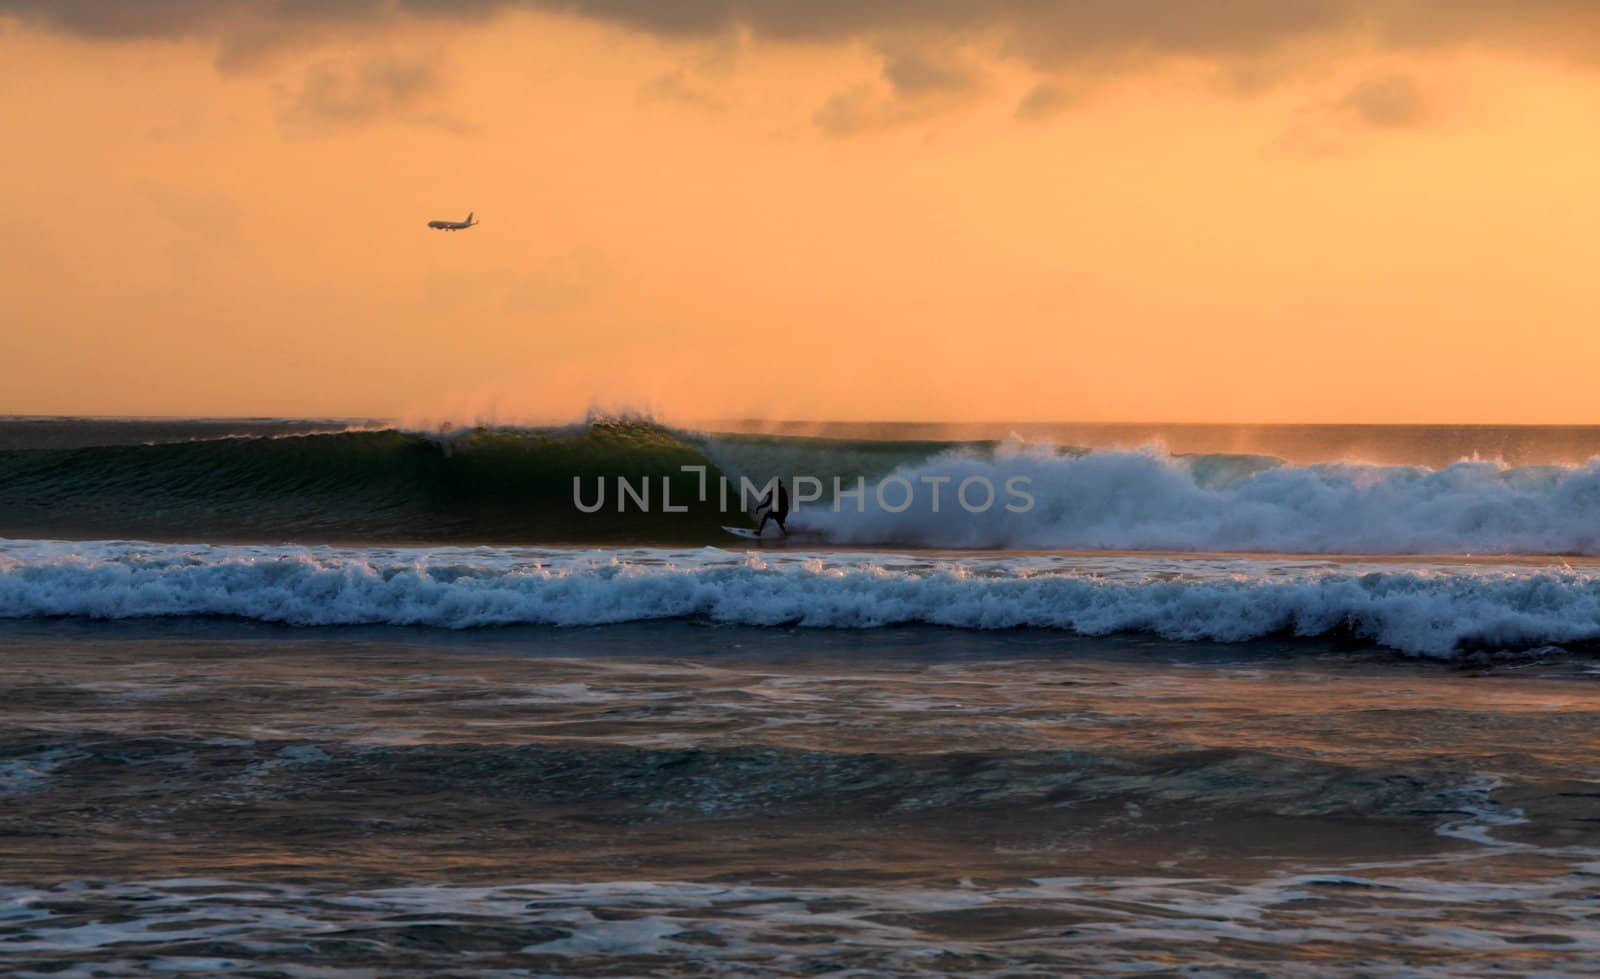 Surfer rides waves at sunset, airplane landing in the background